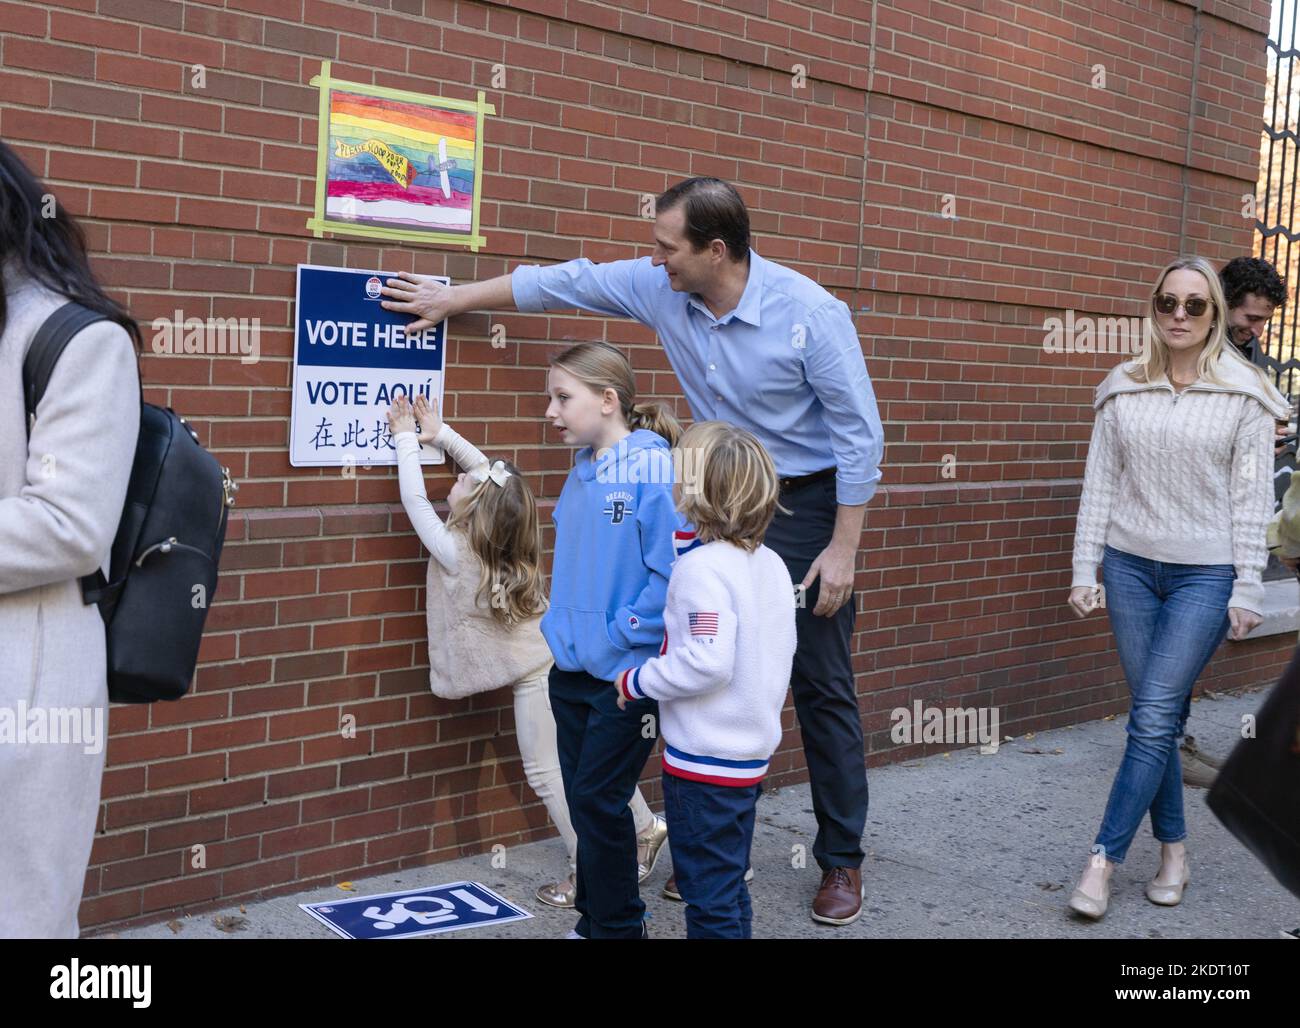 NEW YORK, N.Y. – November 8, 2022: Congressional candidate Dan Goldman repairs a sign while waiting with his family to vote on Election Day 2022. Stock Photo